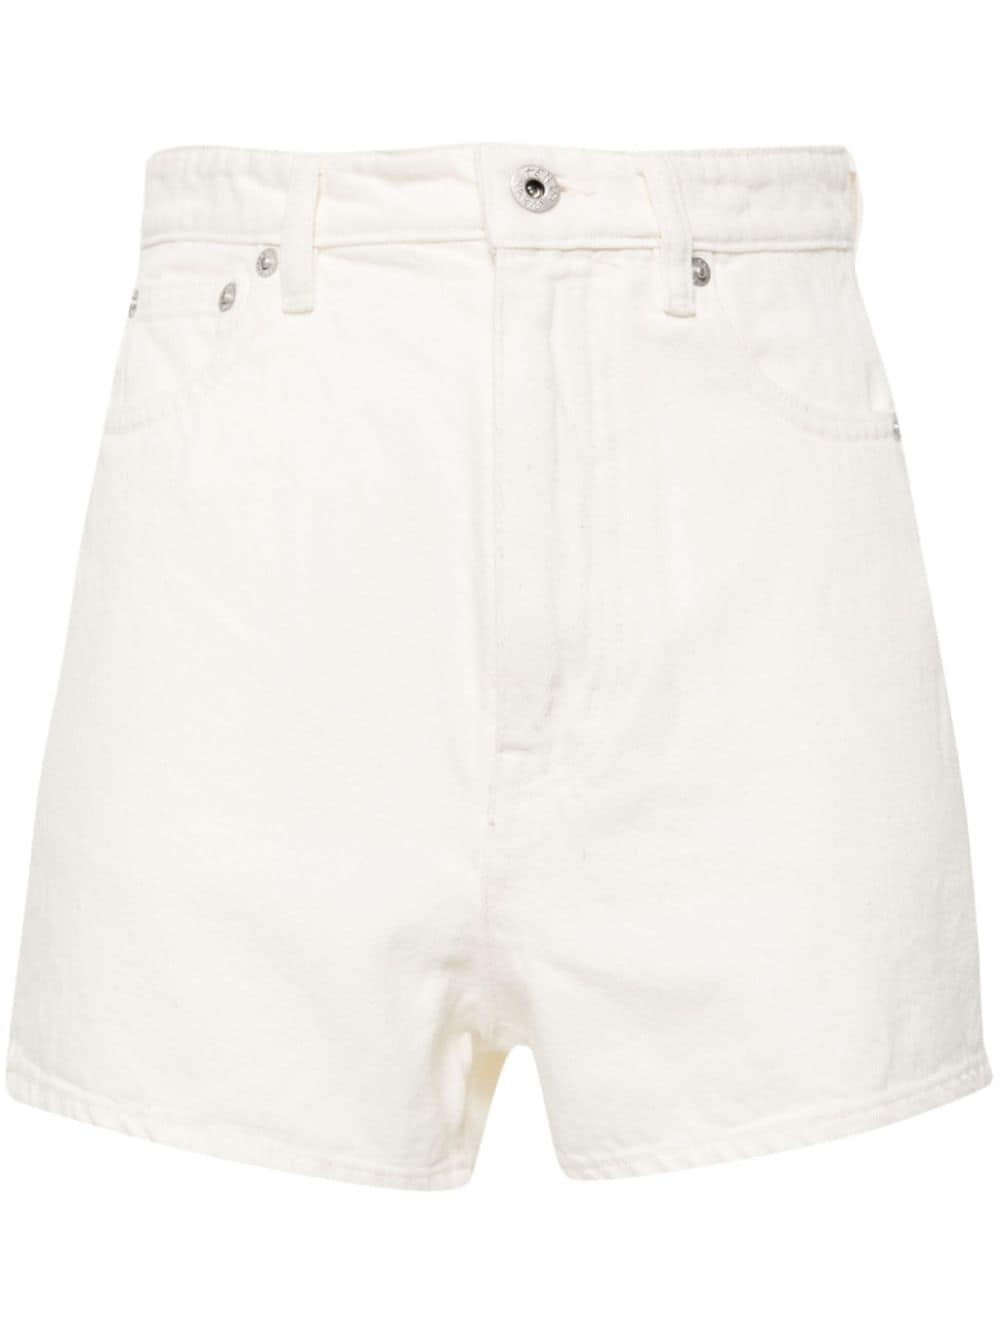 High-rise cotton shorts<BR/><BR/><BR/>